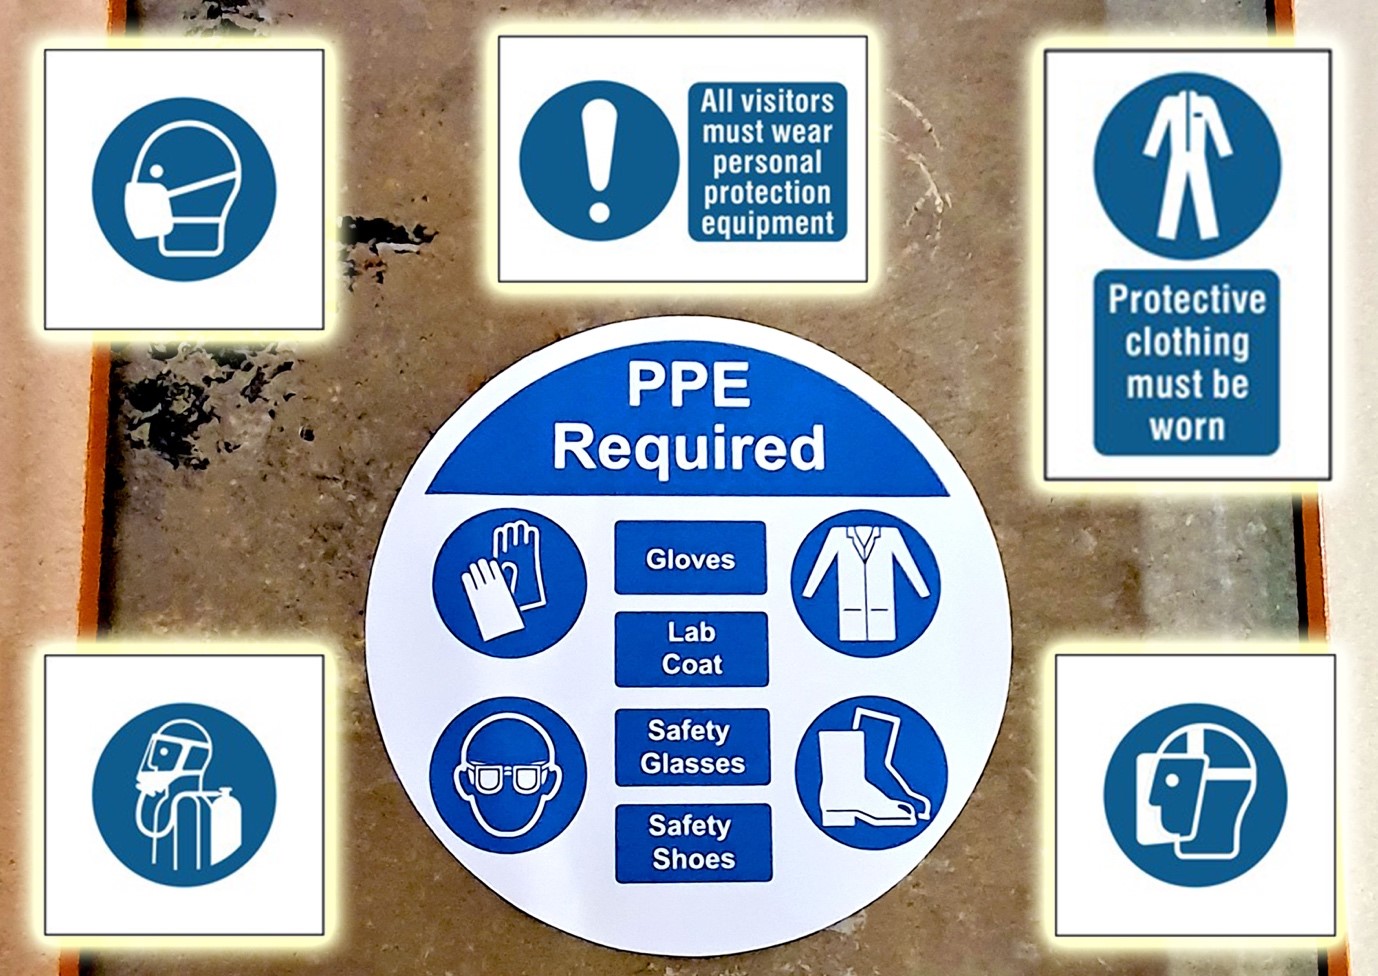 Warning Biohazard Area Wear Personal Protective Clothing Signs